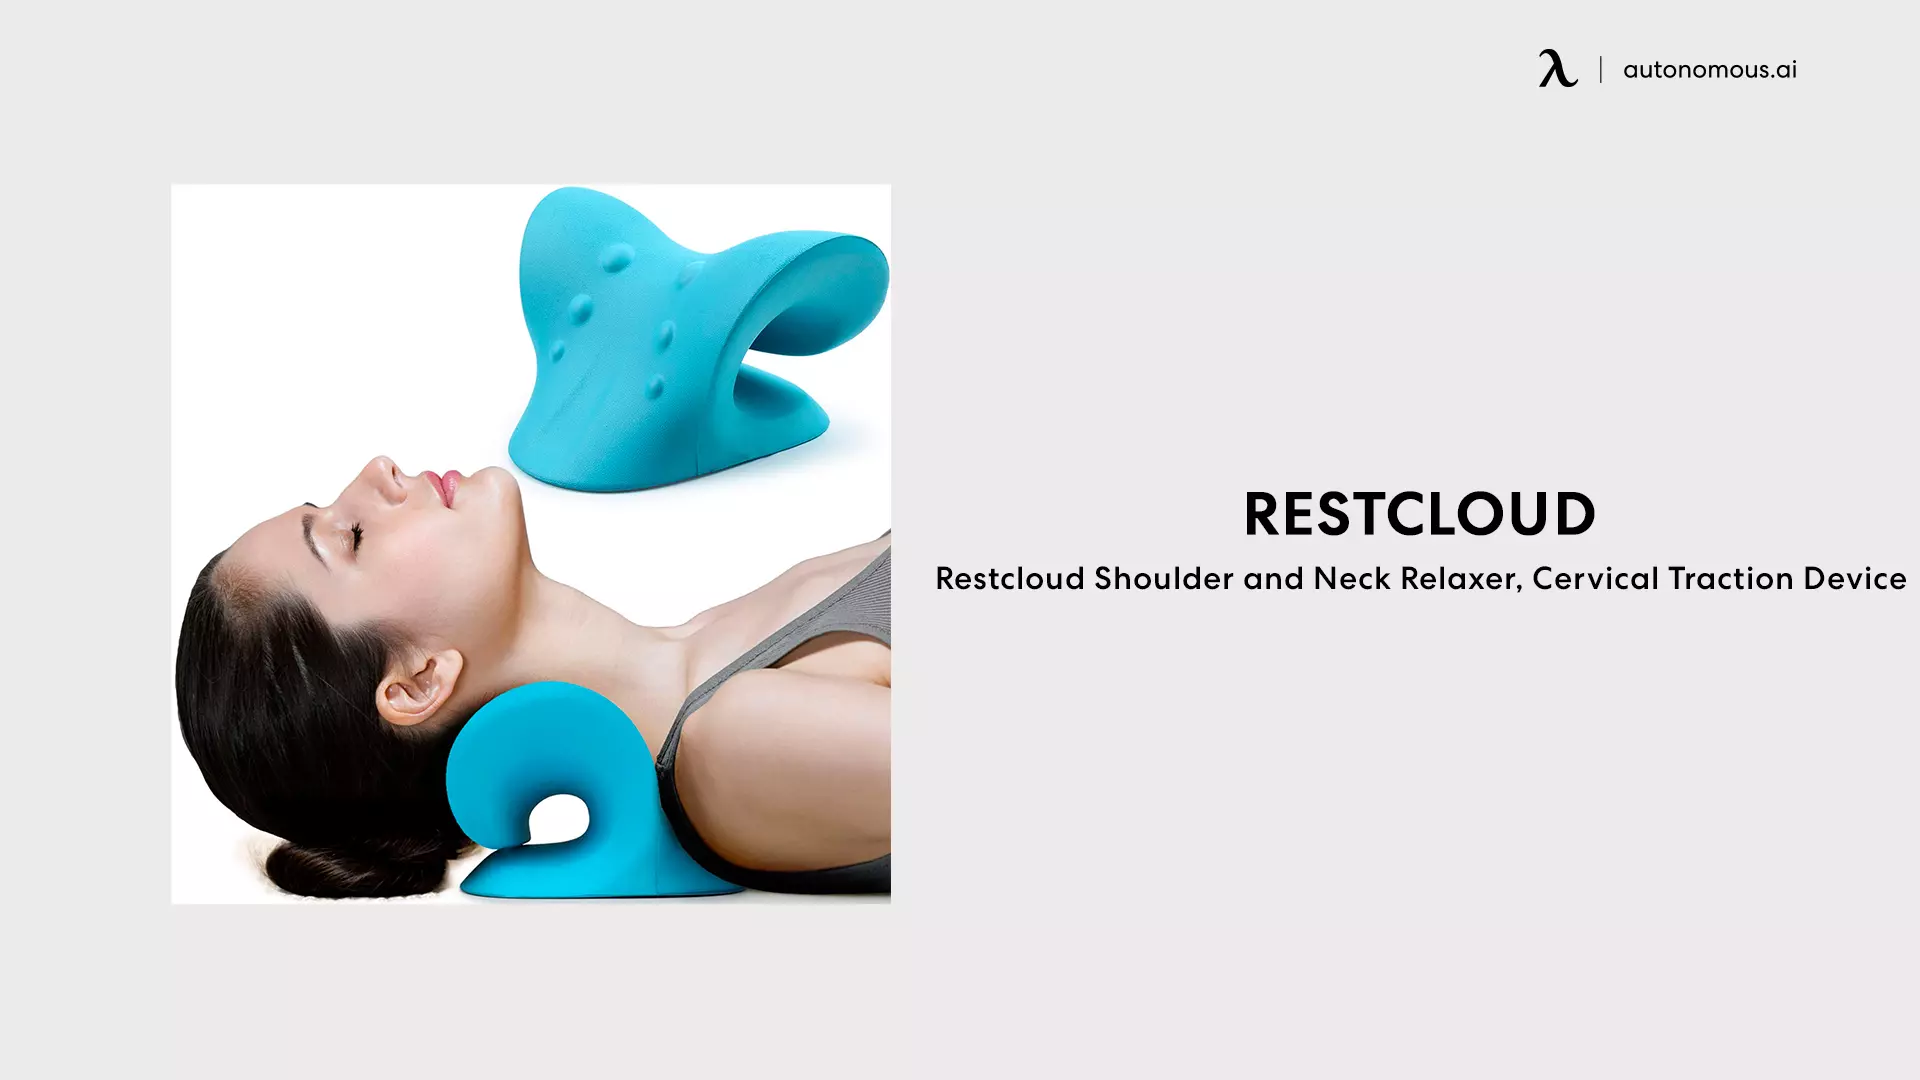 Restcloud Shoulder and Neck Relaxer, Cervical Traction Device